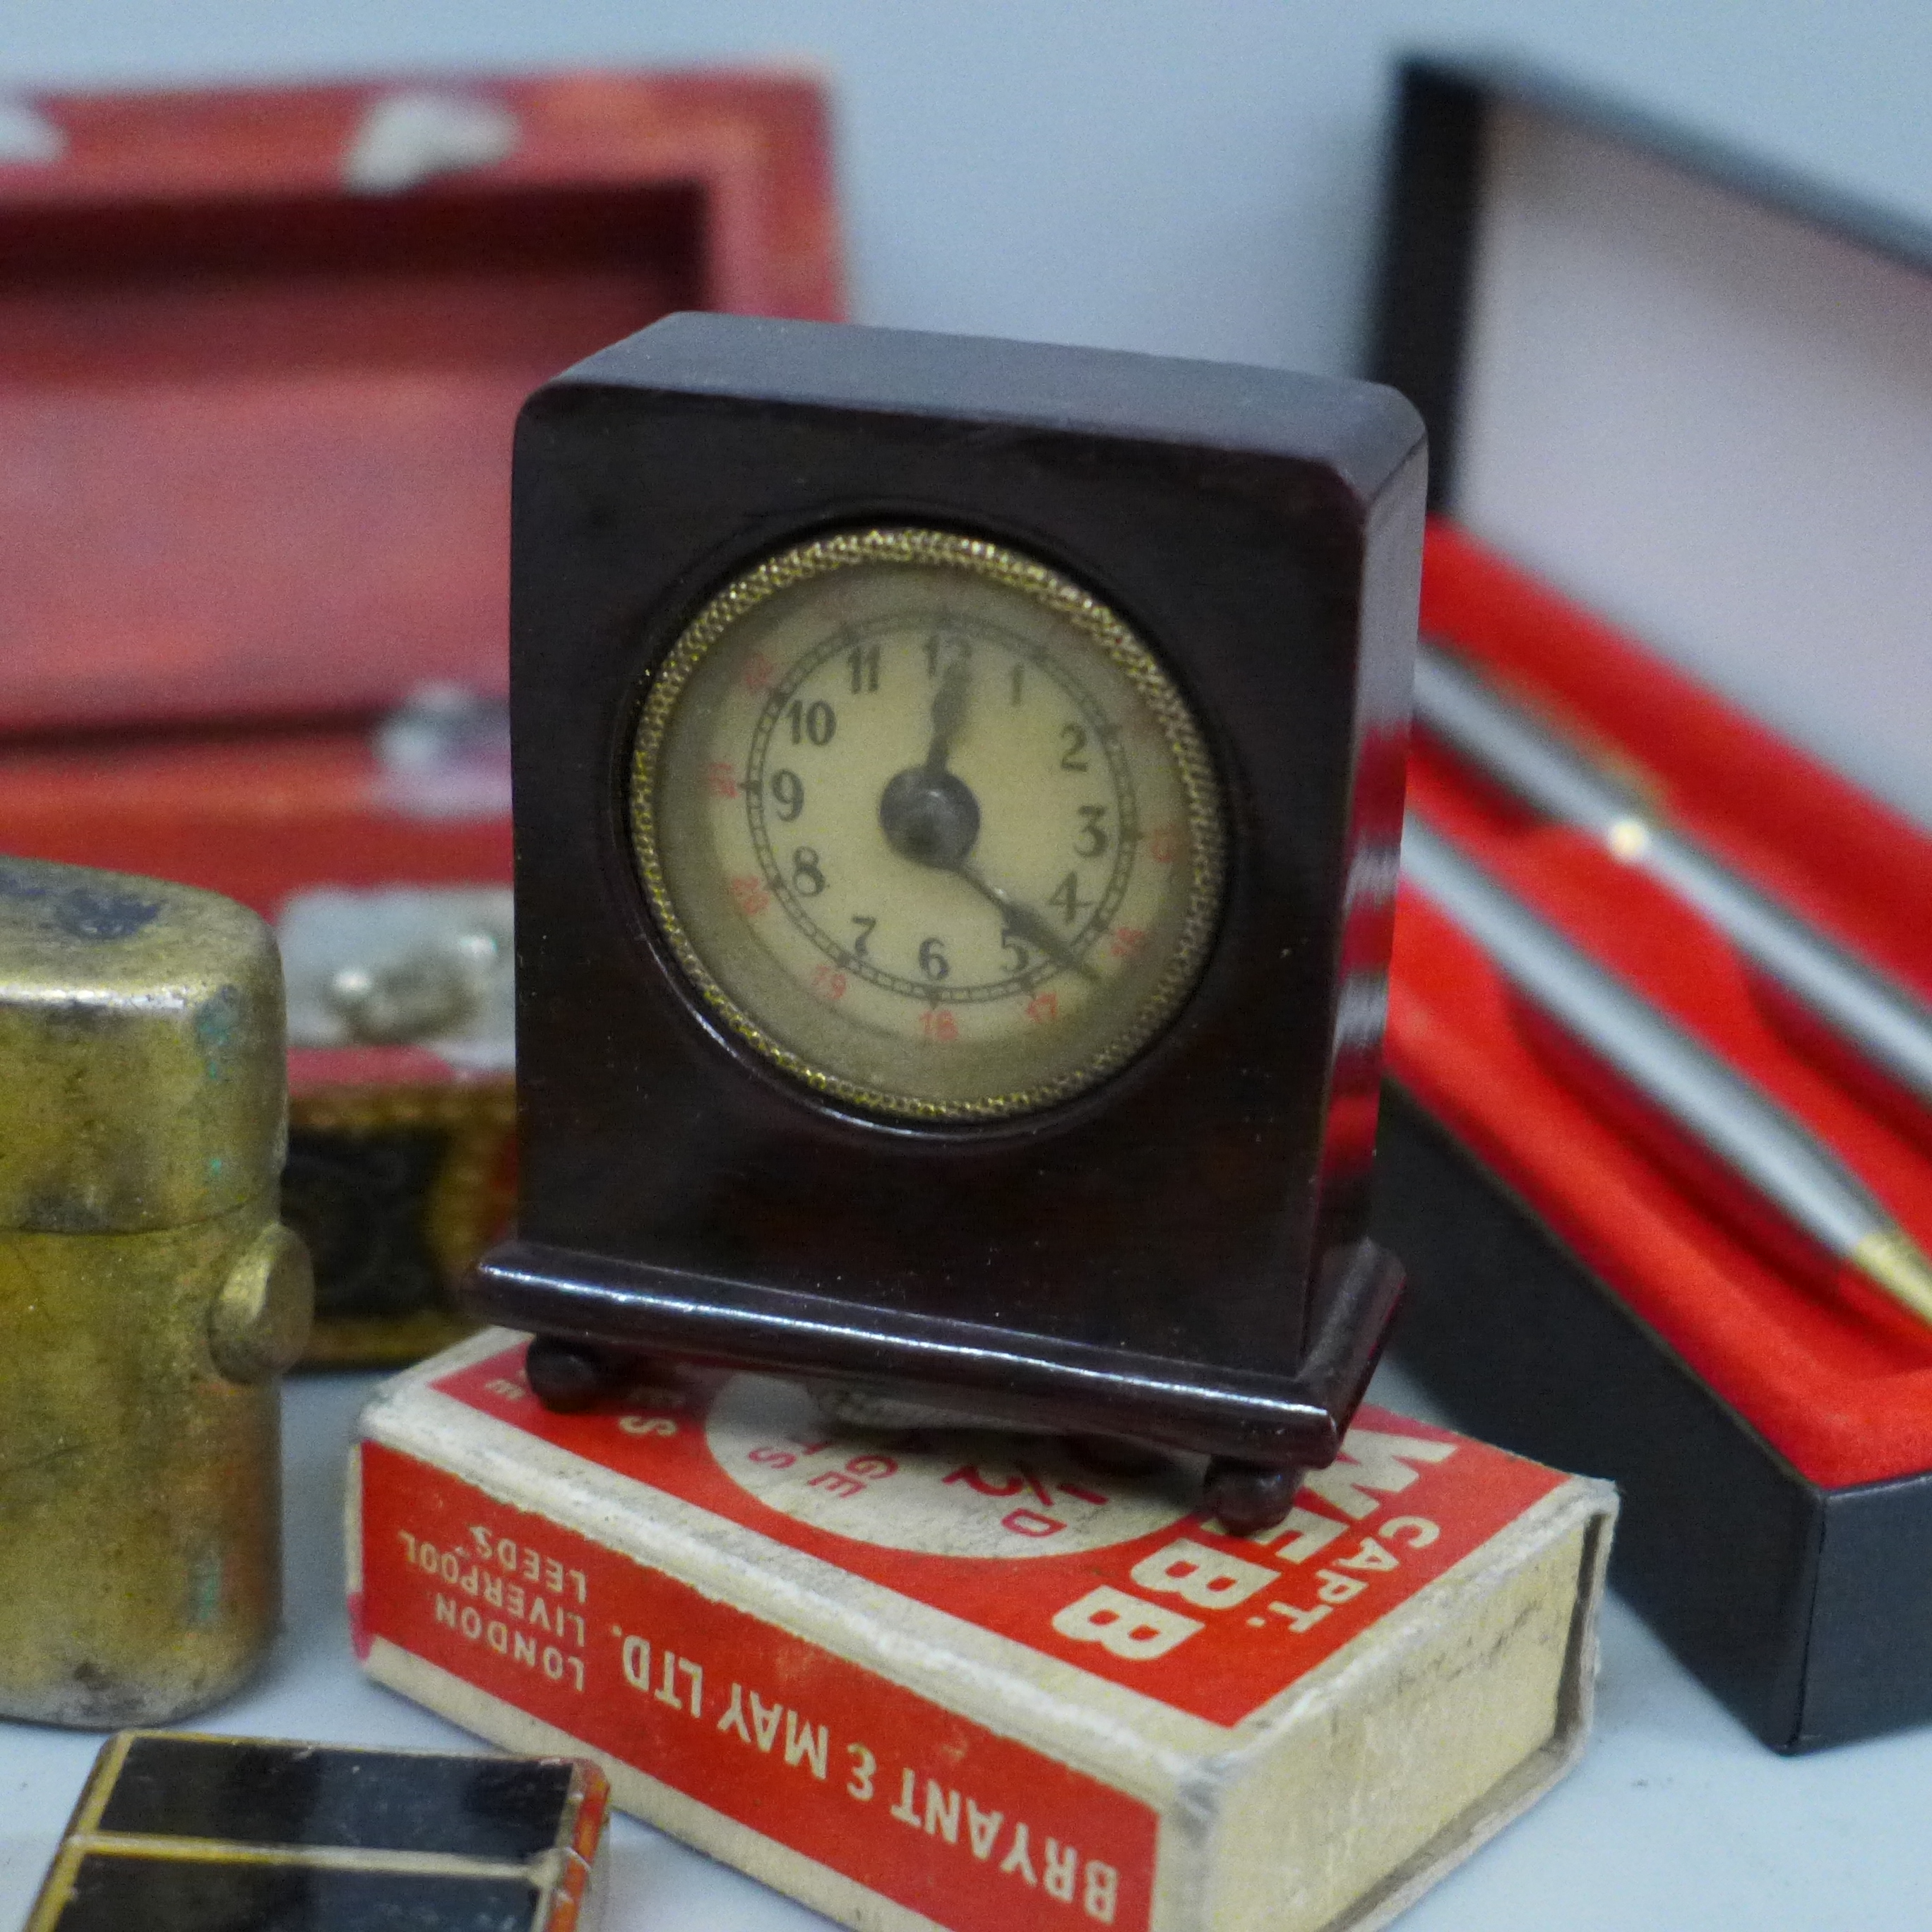 A novelty Bakelite clock read out tape measure, lighters, a travel inkwell, two Georgian buckles, - Image 5 of 7